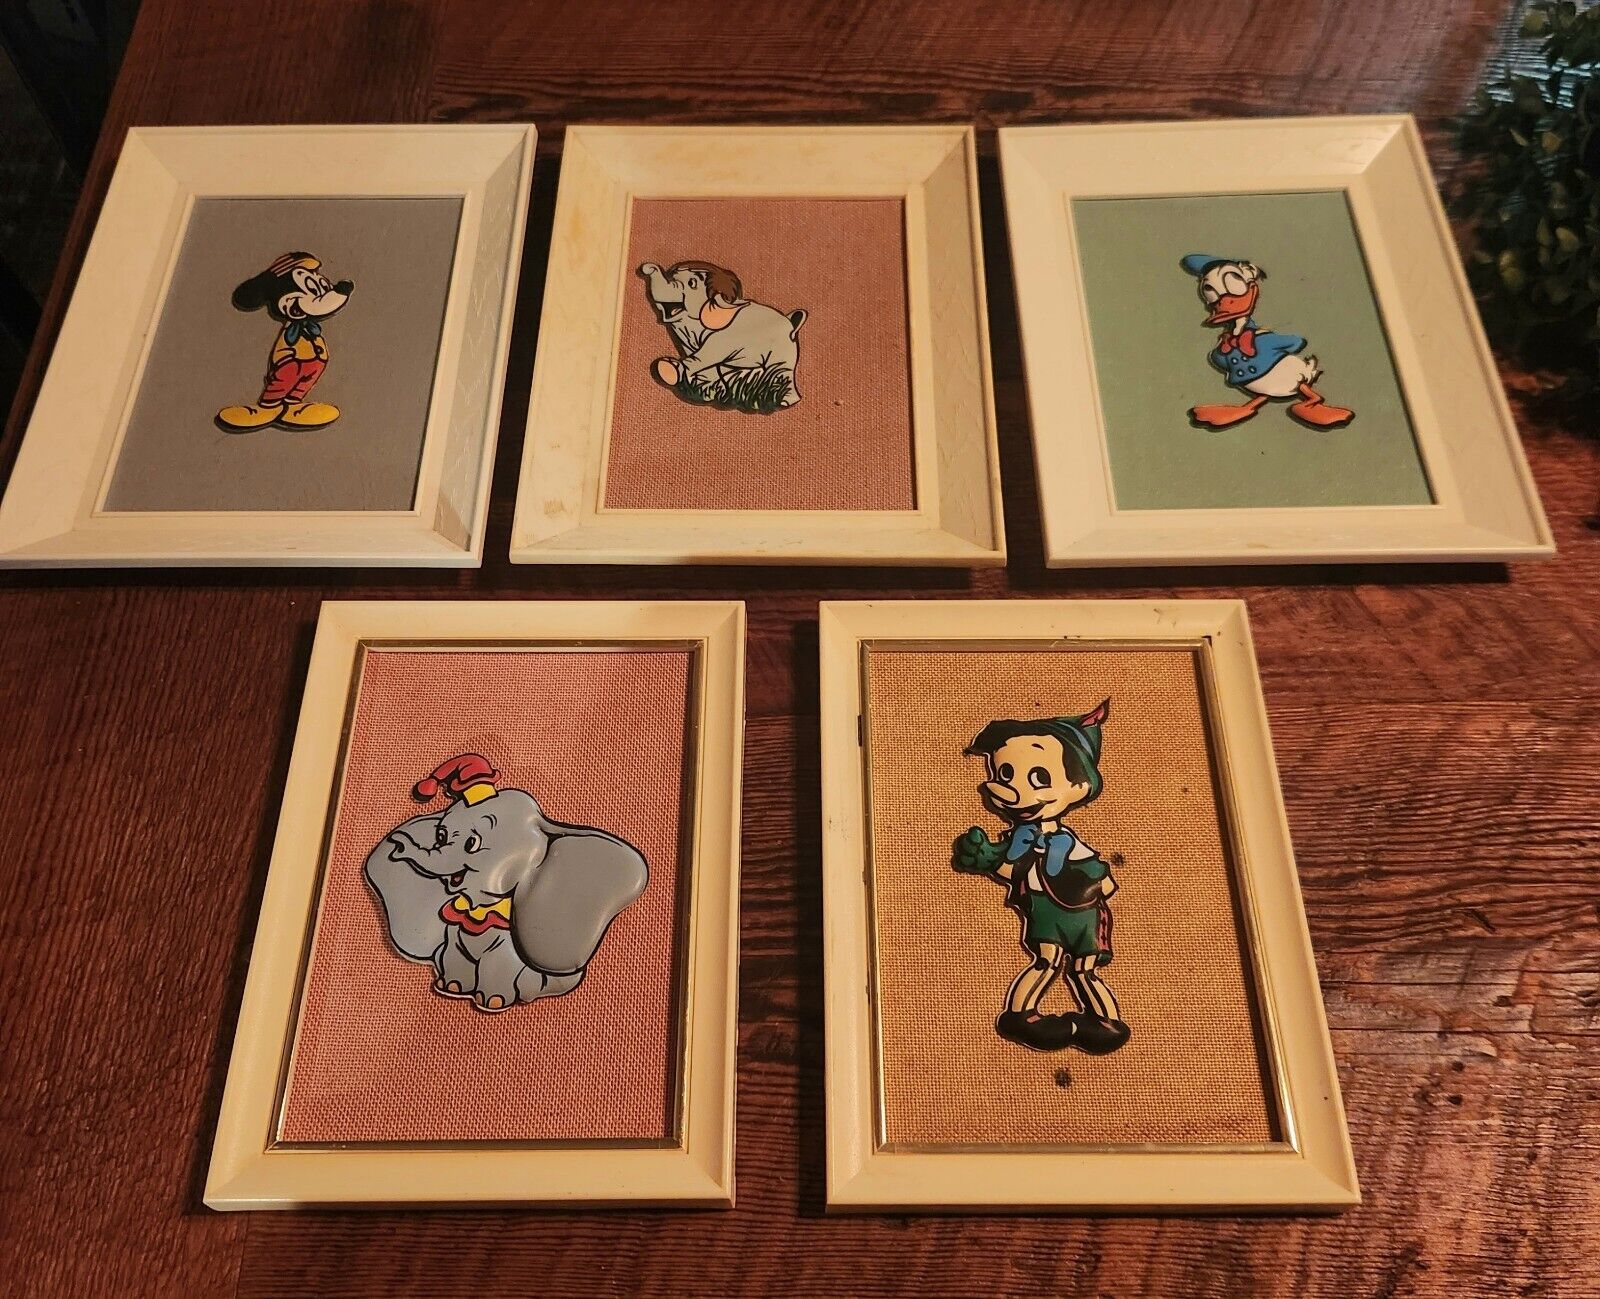 60's VIntage Framed Puffed Pictures